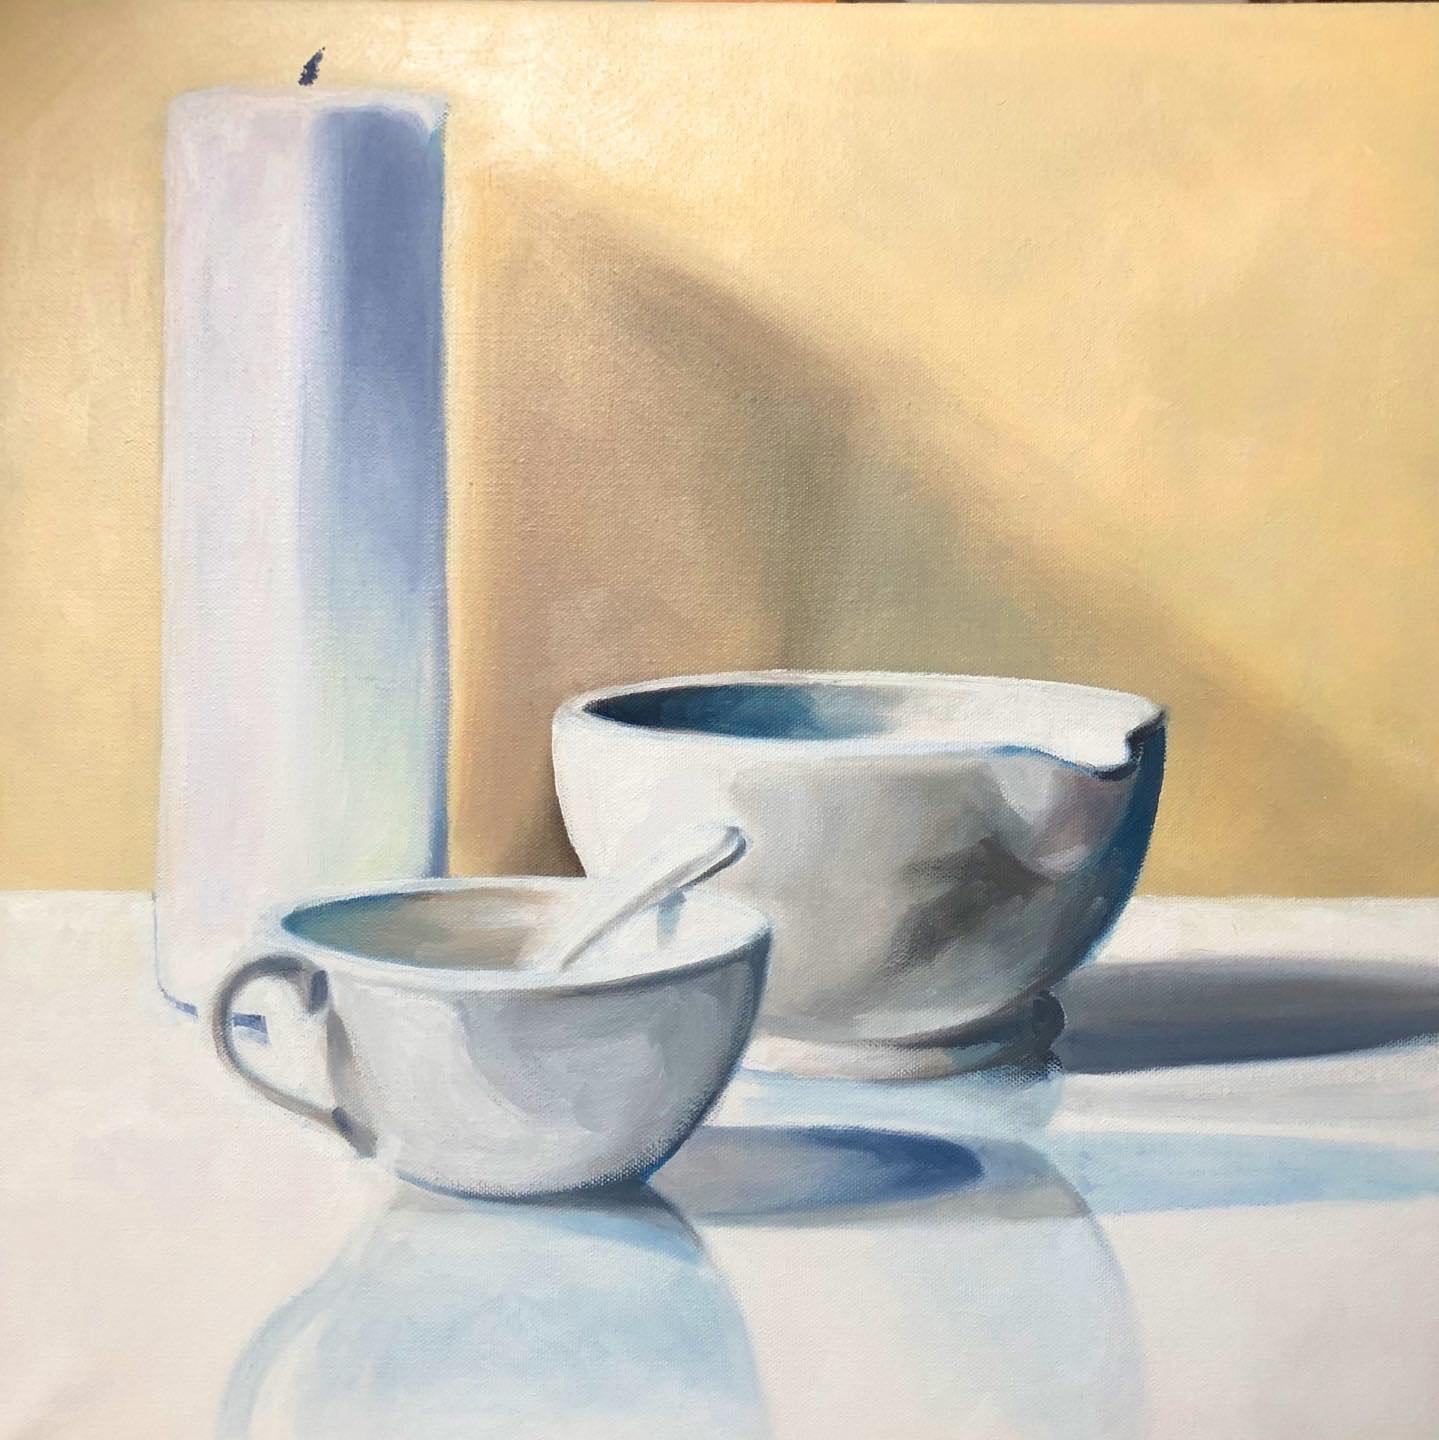 Reacquainting myself with a previous still life theme. Oil on canvas. 51 cm x 51 cm